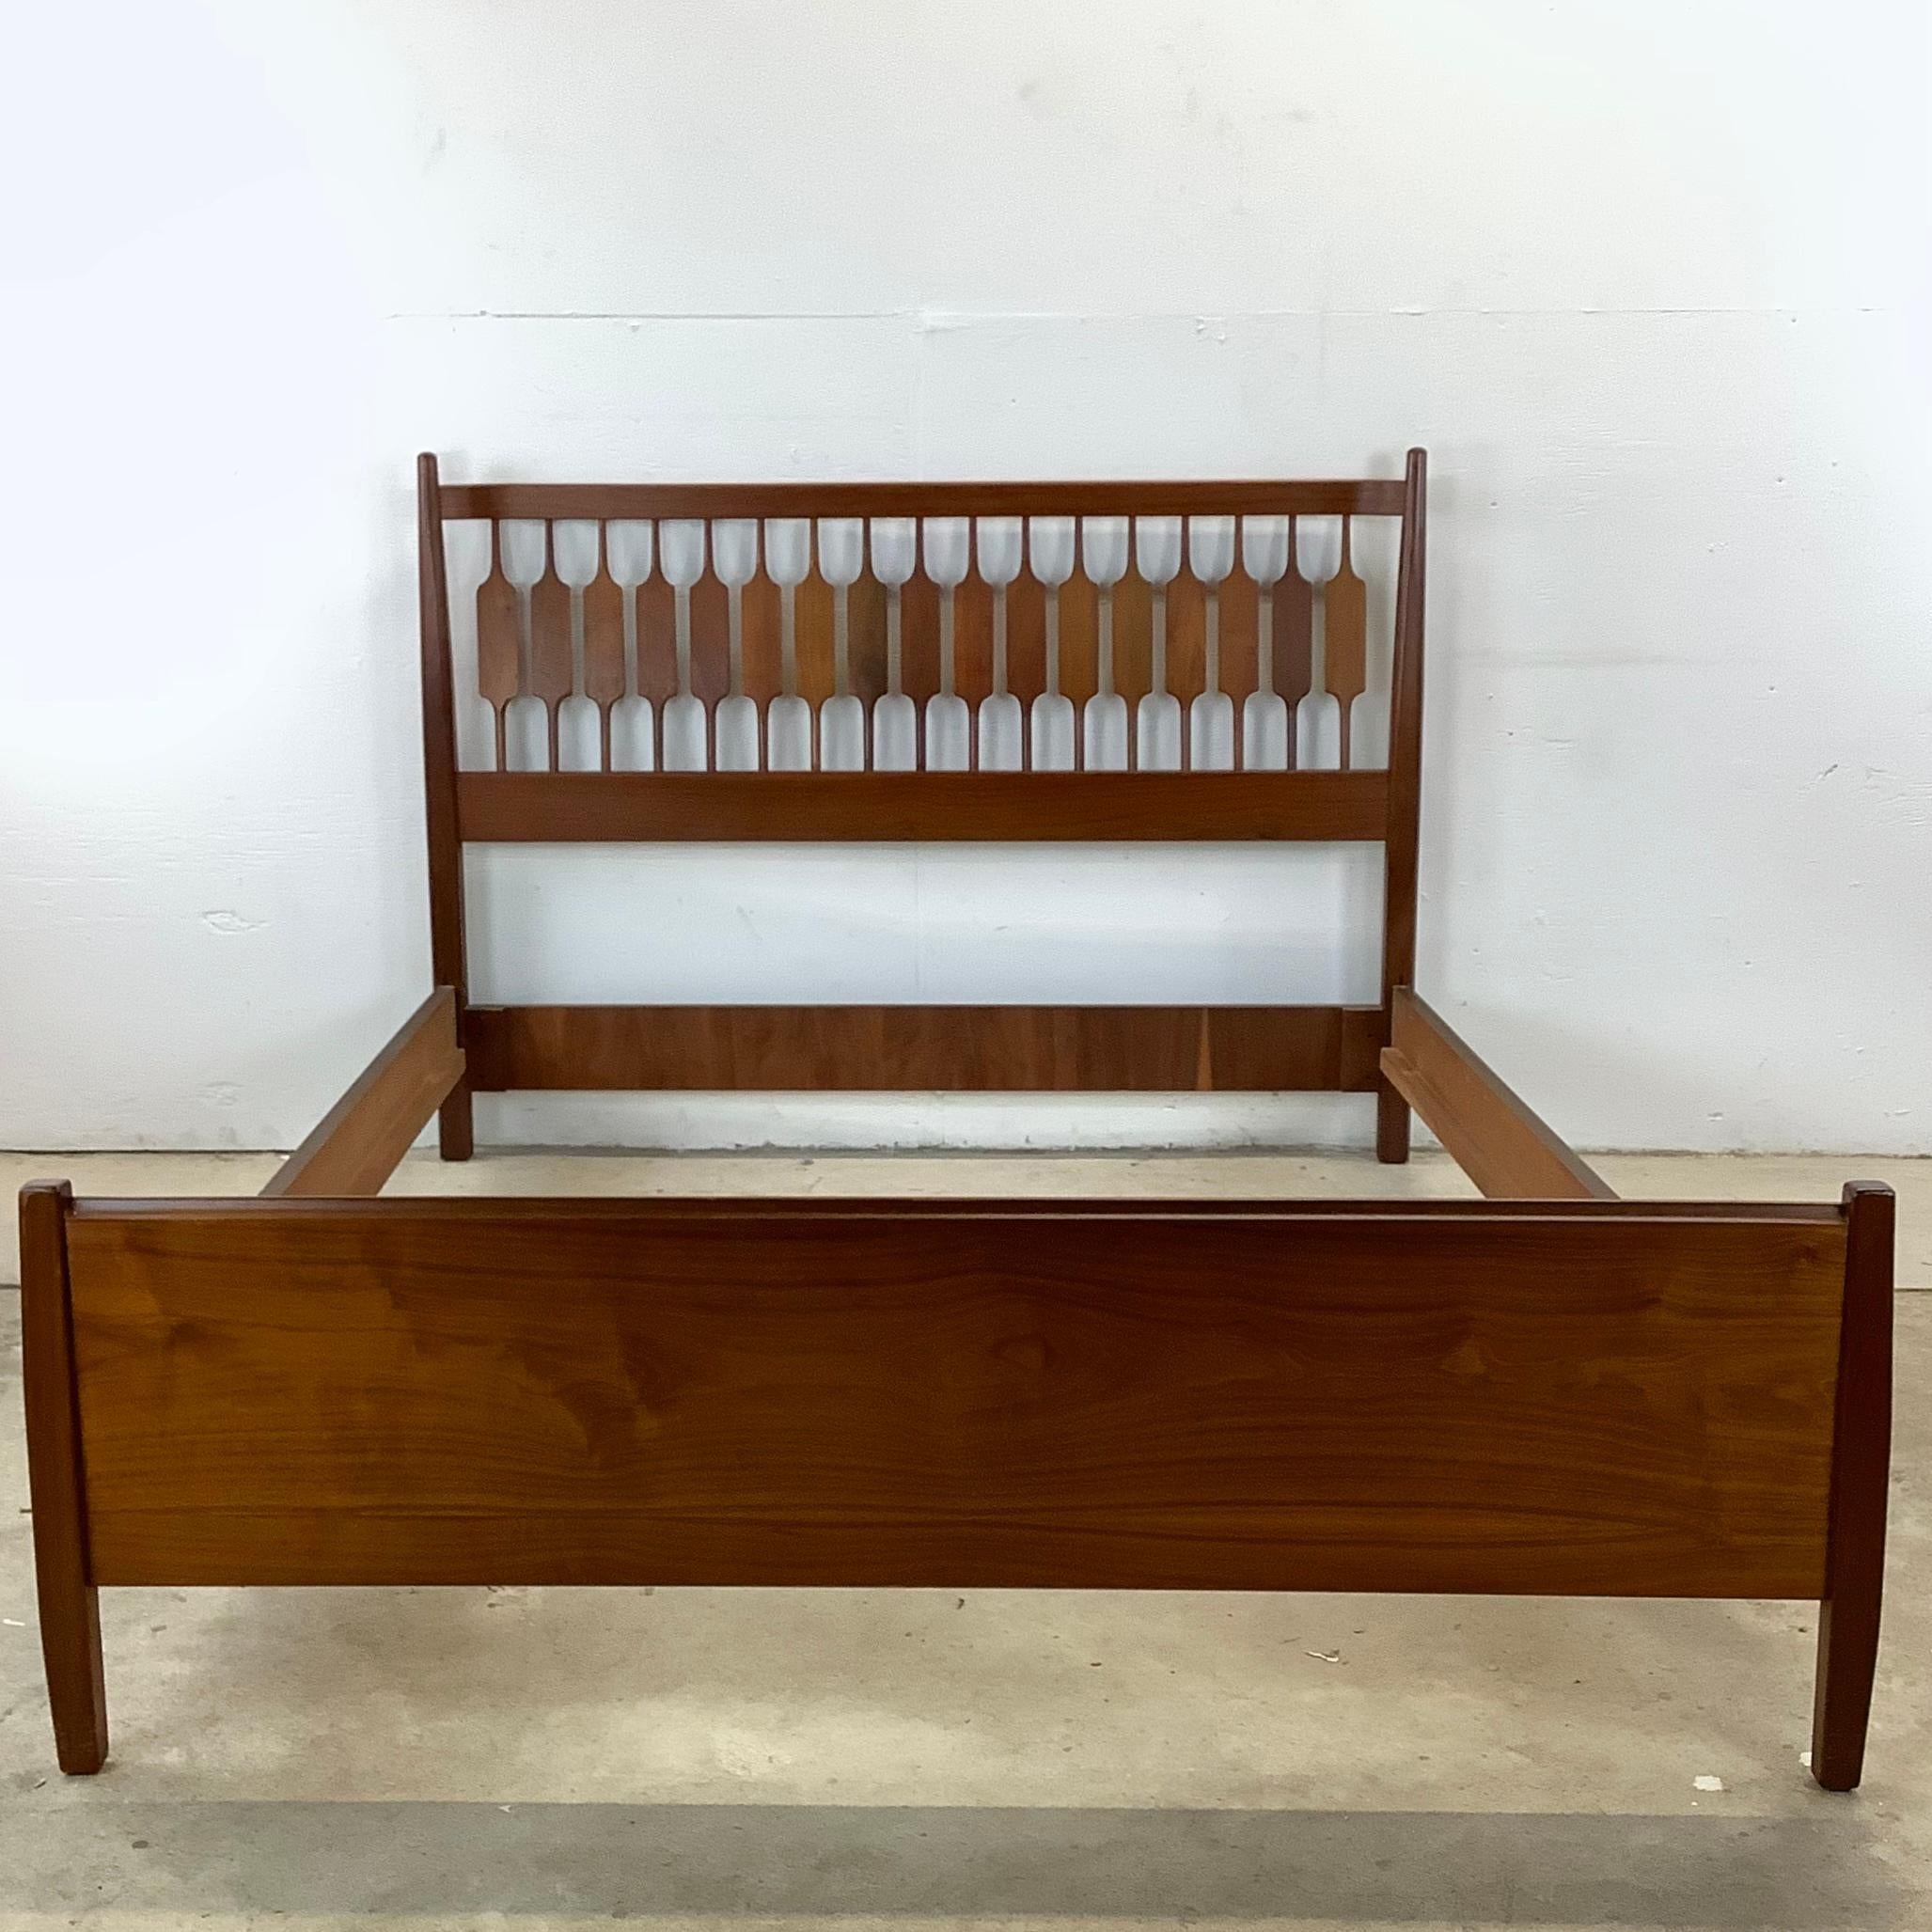 Imbue your bedroom with the spirit of the 1960s Mid-Century Modern era with this solid walnut full size double bed, designed by the distinguished Kipp Stewart for Drexel Furniture. With its sleek lines and warm walnut construction, this bed is a